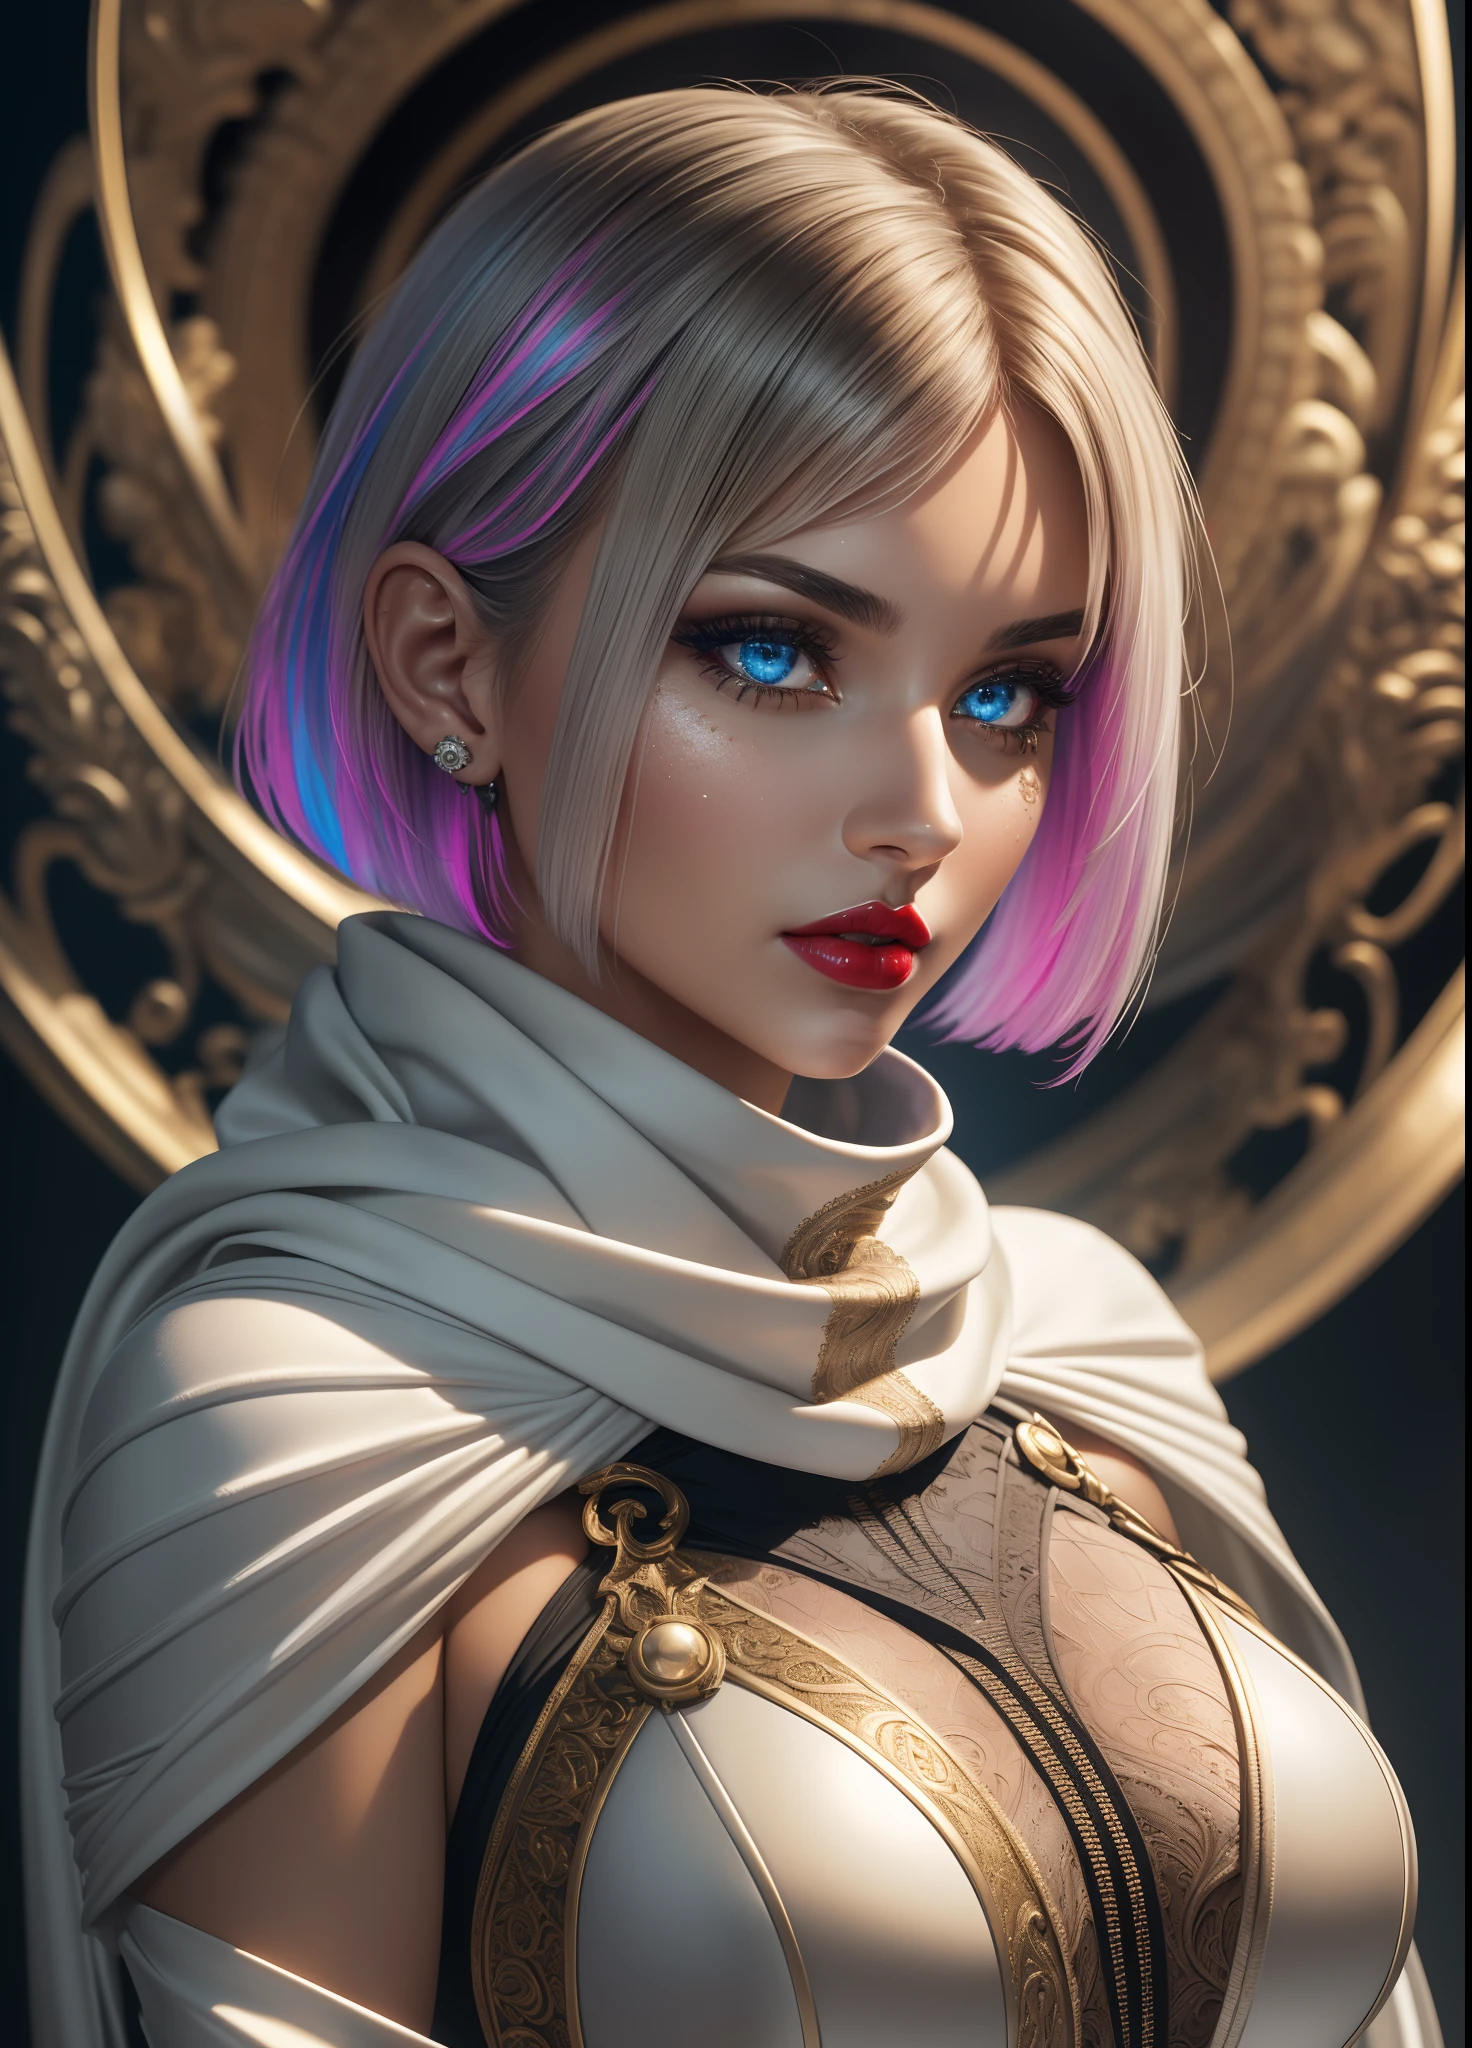 (Masterpiece) realistic bust to the below the pelves of a beauty hyperrealist & photorealist beauty young astonishing anime KNIGHT PRINCESS girl in highly & extremely detailed white futuristic combat plugsuit body with cape & scarf (masterpiece), magic & incantation glowing flying surrounded her, Unity 8k, pearly perfect WET skin with pores (short bob cut hair with colorful bangs fringes) ((perfect face shapes, complete perfect red lips, perfect nose, correct beautiful eyes, eyelashes, detailed intricate iris textured face in ZBrush)), full HD vines, midnight aura, BLOODBOURNE aesthetic STYLE, developed by Unreal Engine 5, Ultra Sharp Focus, Art by Alberto Seveso, Sci-Fi, vibrant & intricate Artwork, golden Ratio, epic, HR Giger STYLE